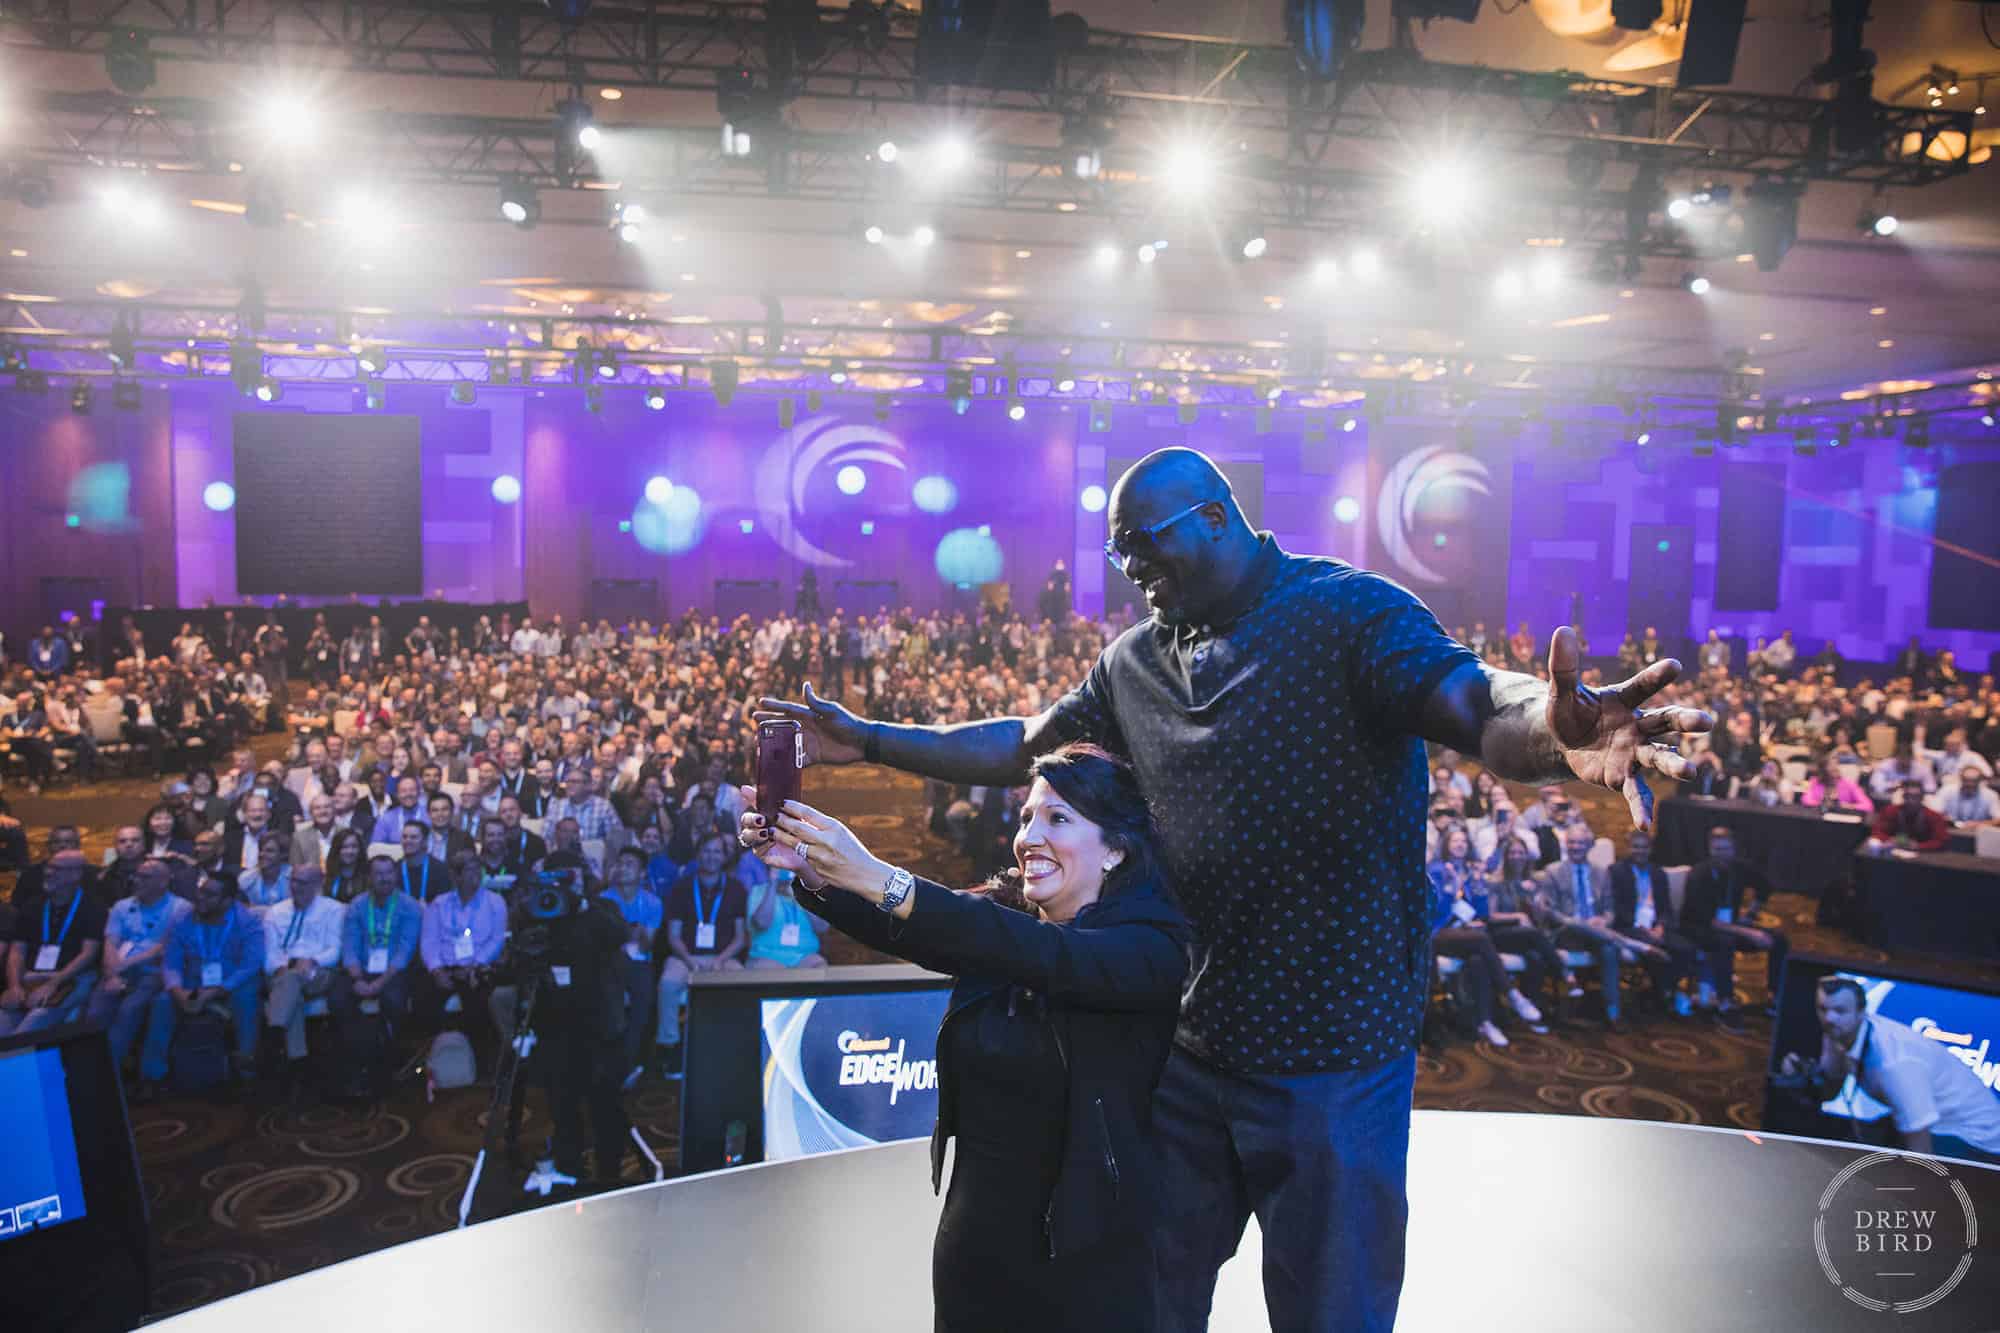 Photo of two people taking a selfie on a stage in front of an audience at a corporate event. Photo by San Francisco based photographer Drew Bird.